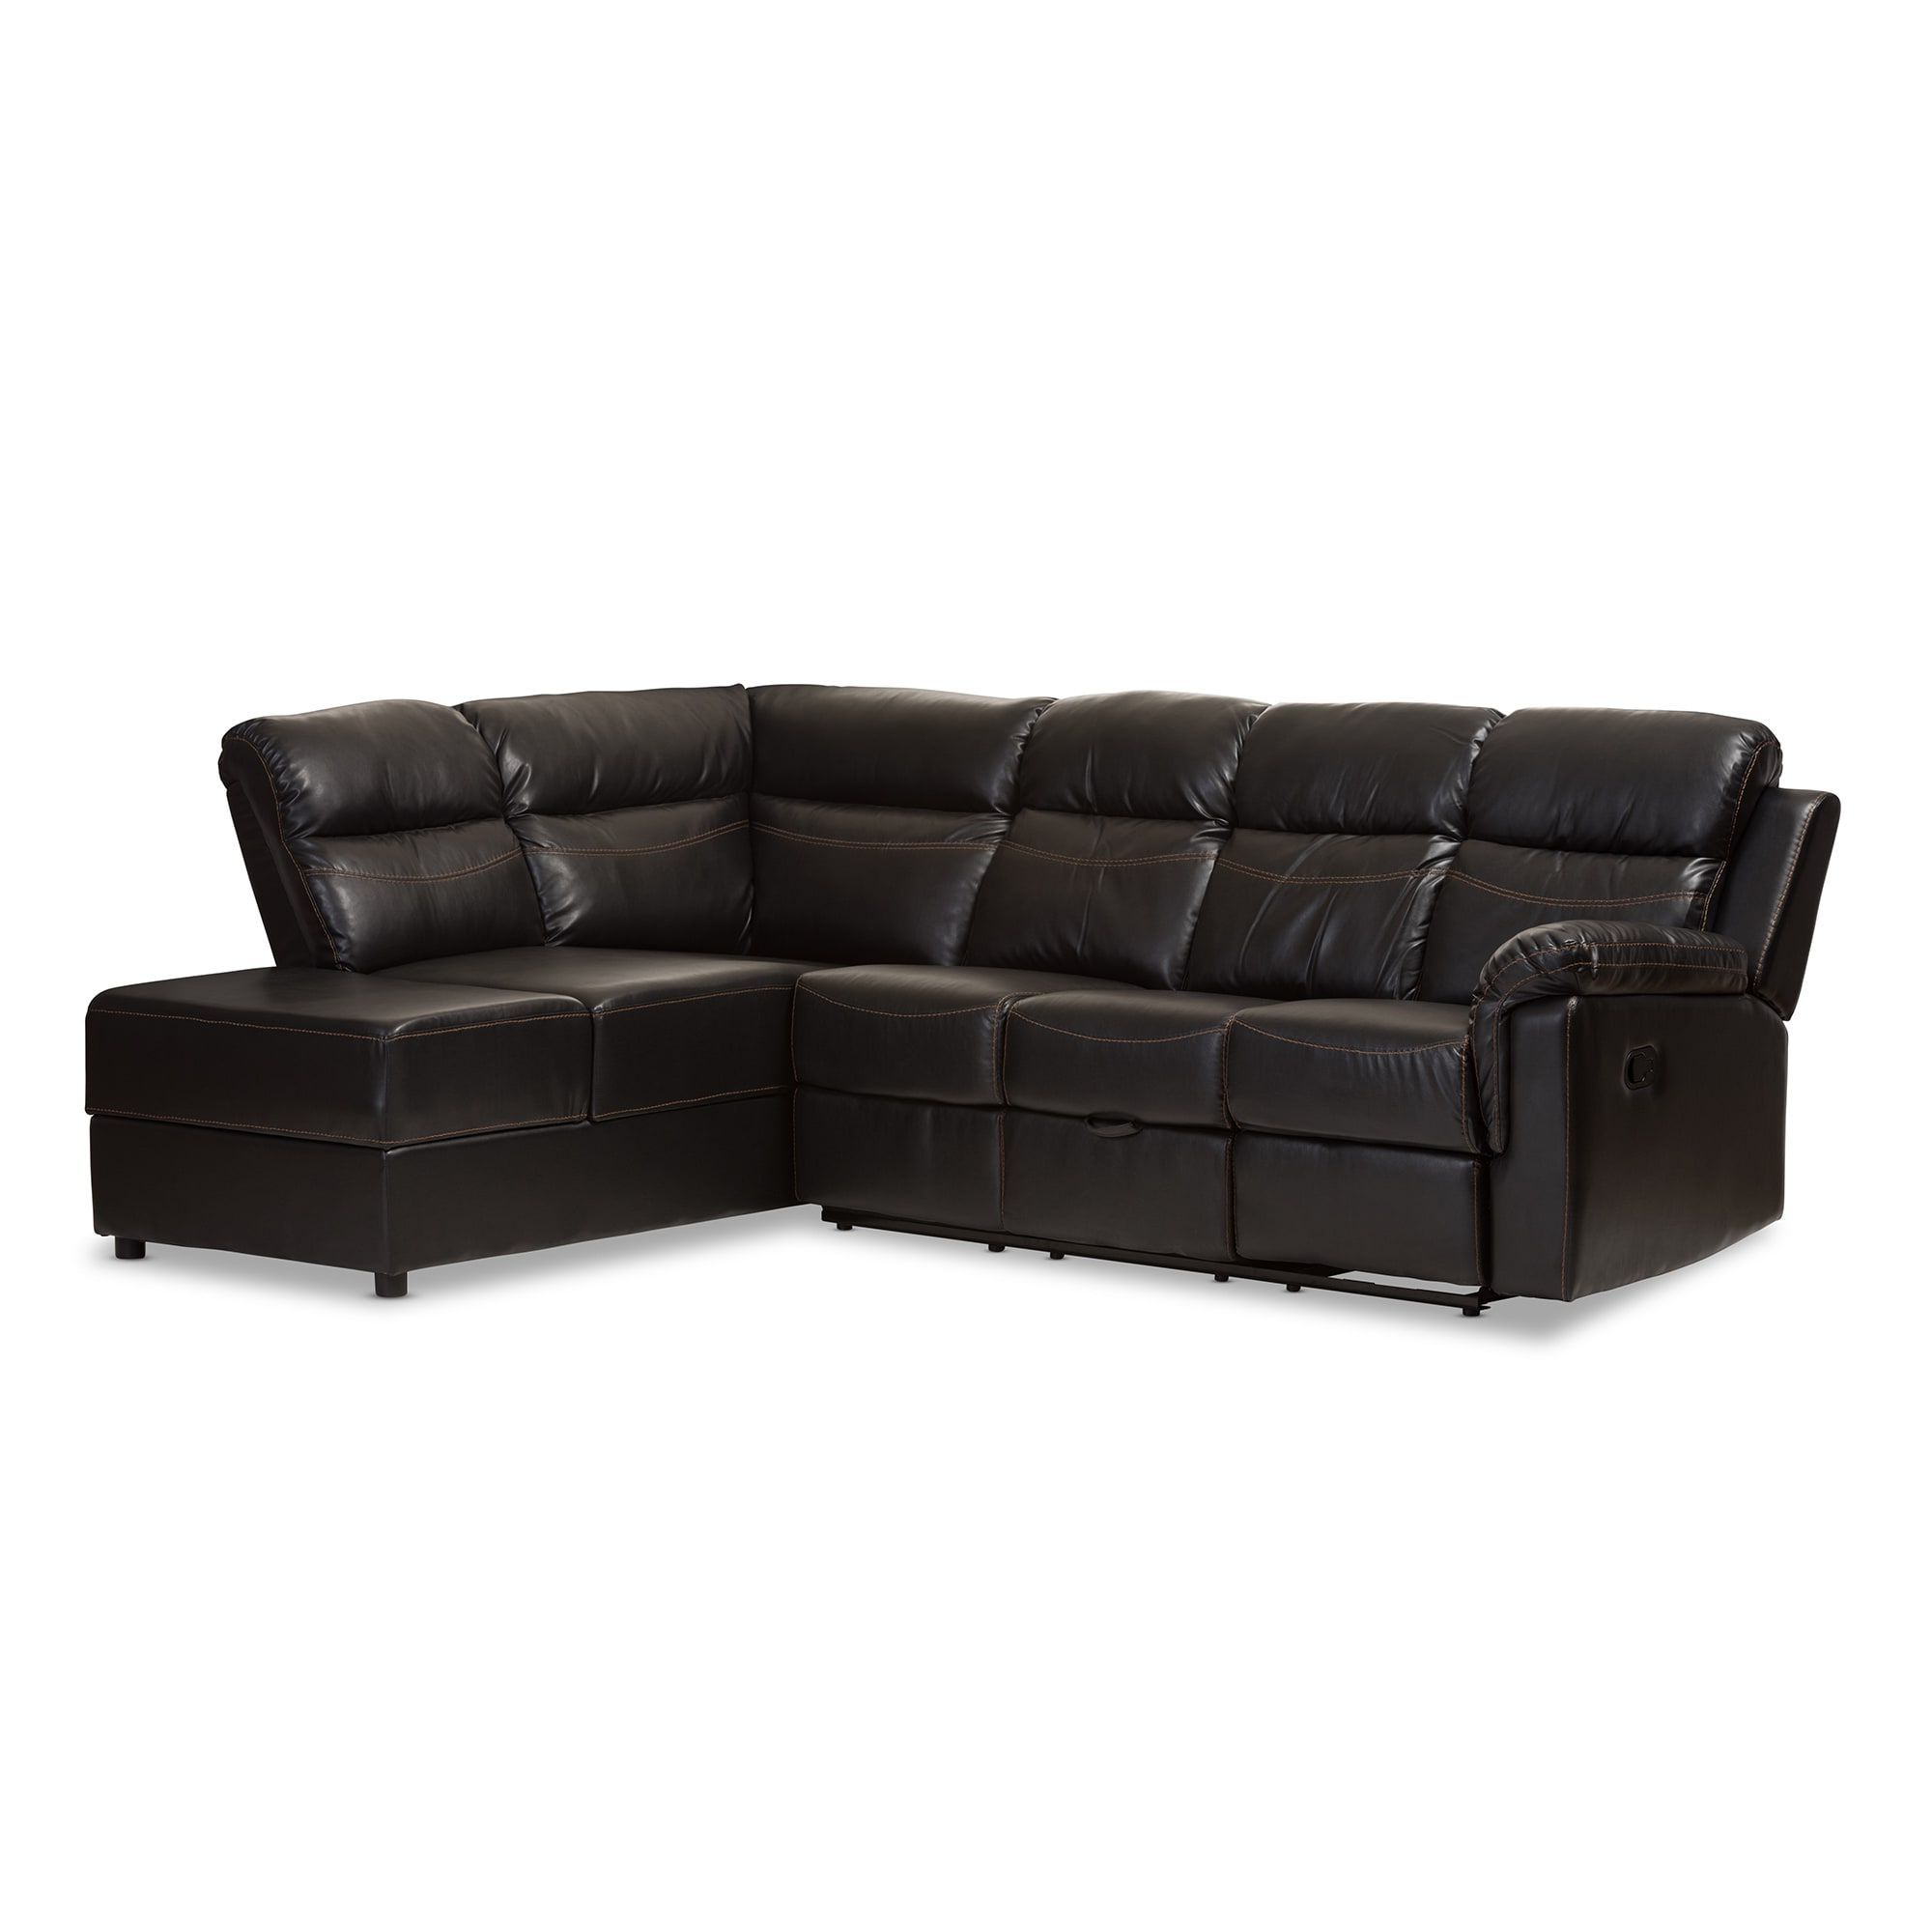 2pc Burland Contemporary Sectional Sofas Charcoal Within Best And Newest Our Best Living Room Furniture Deals (View 15 of 20)